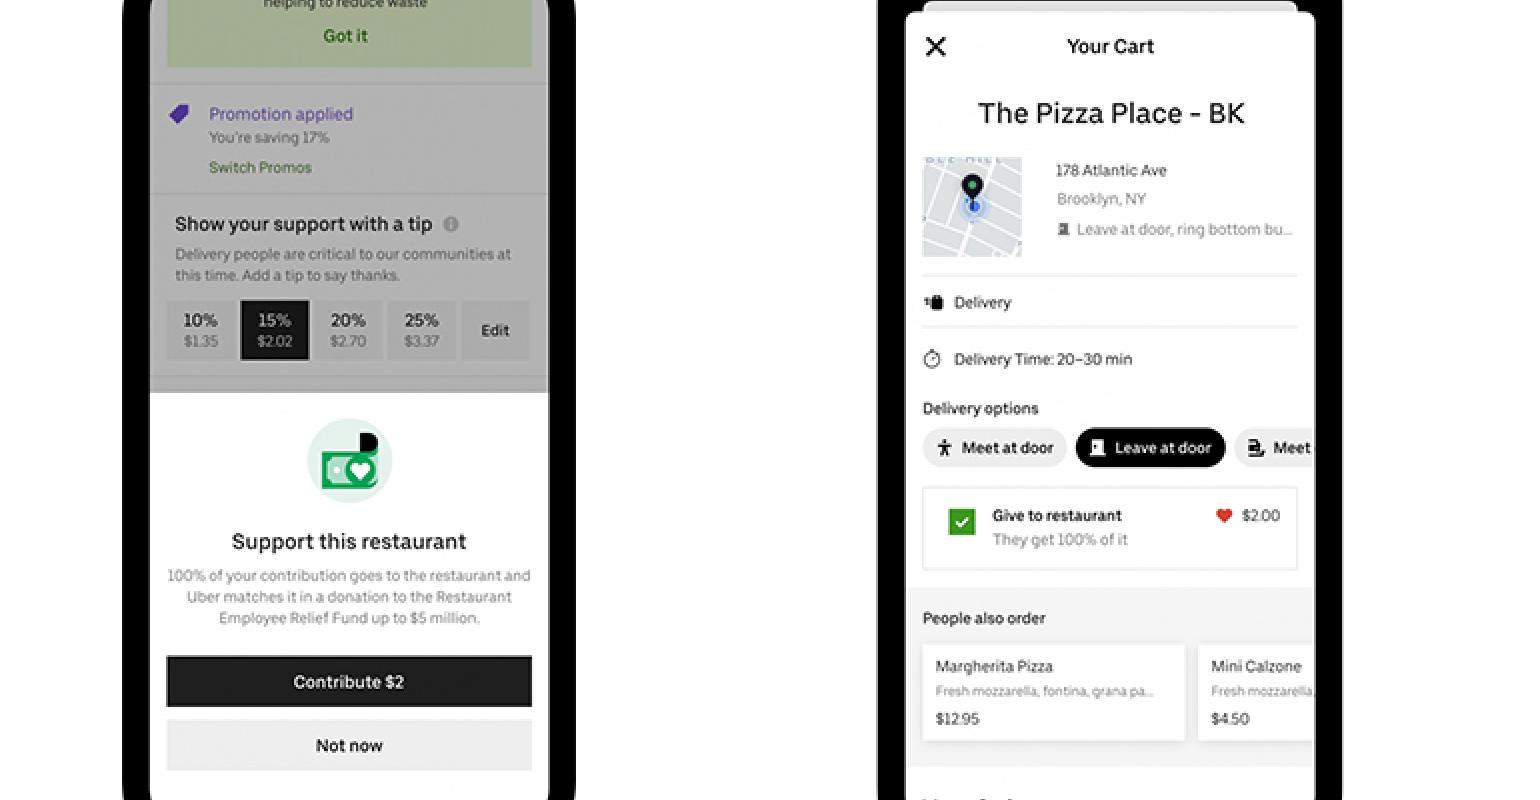 Third-party apps are doing more for restaurants and the industry 